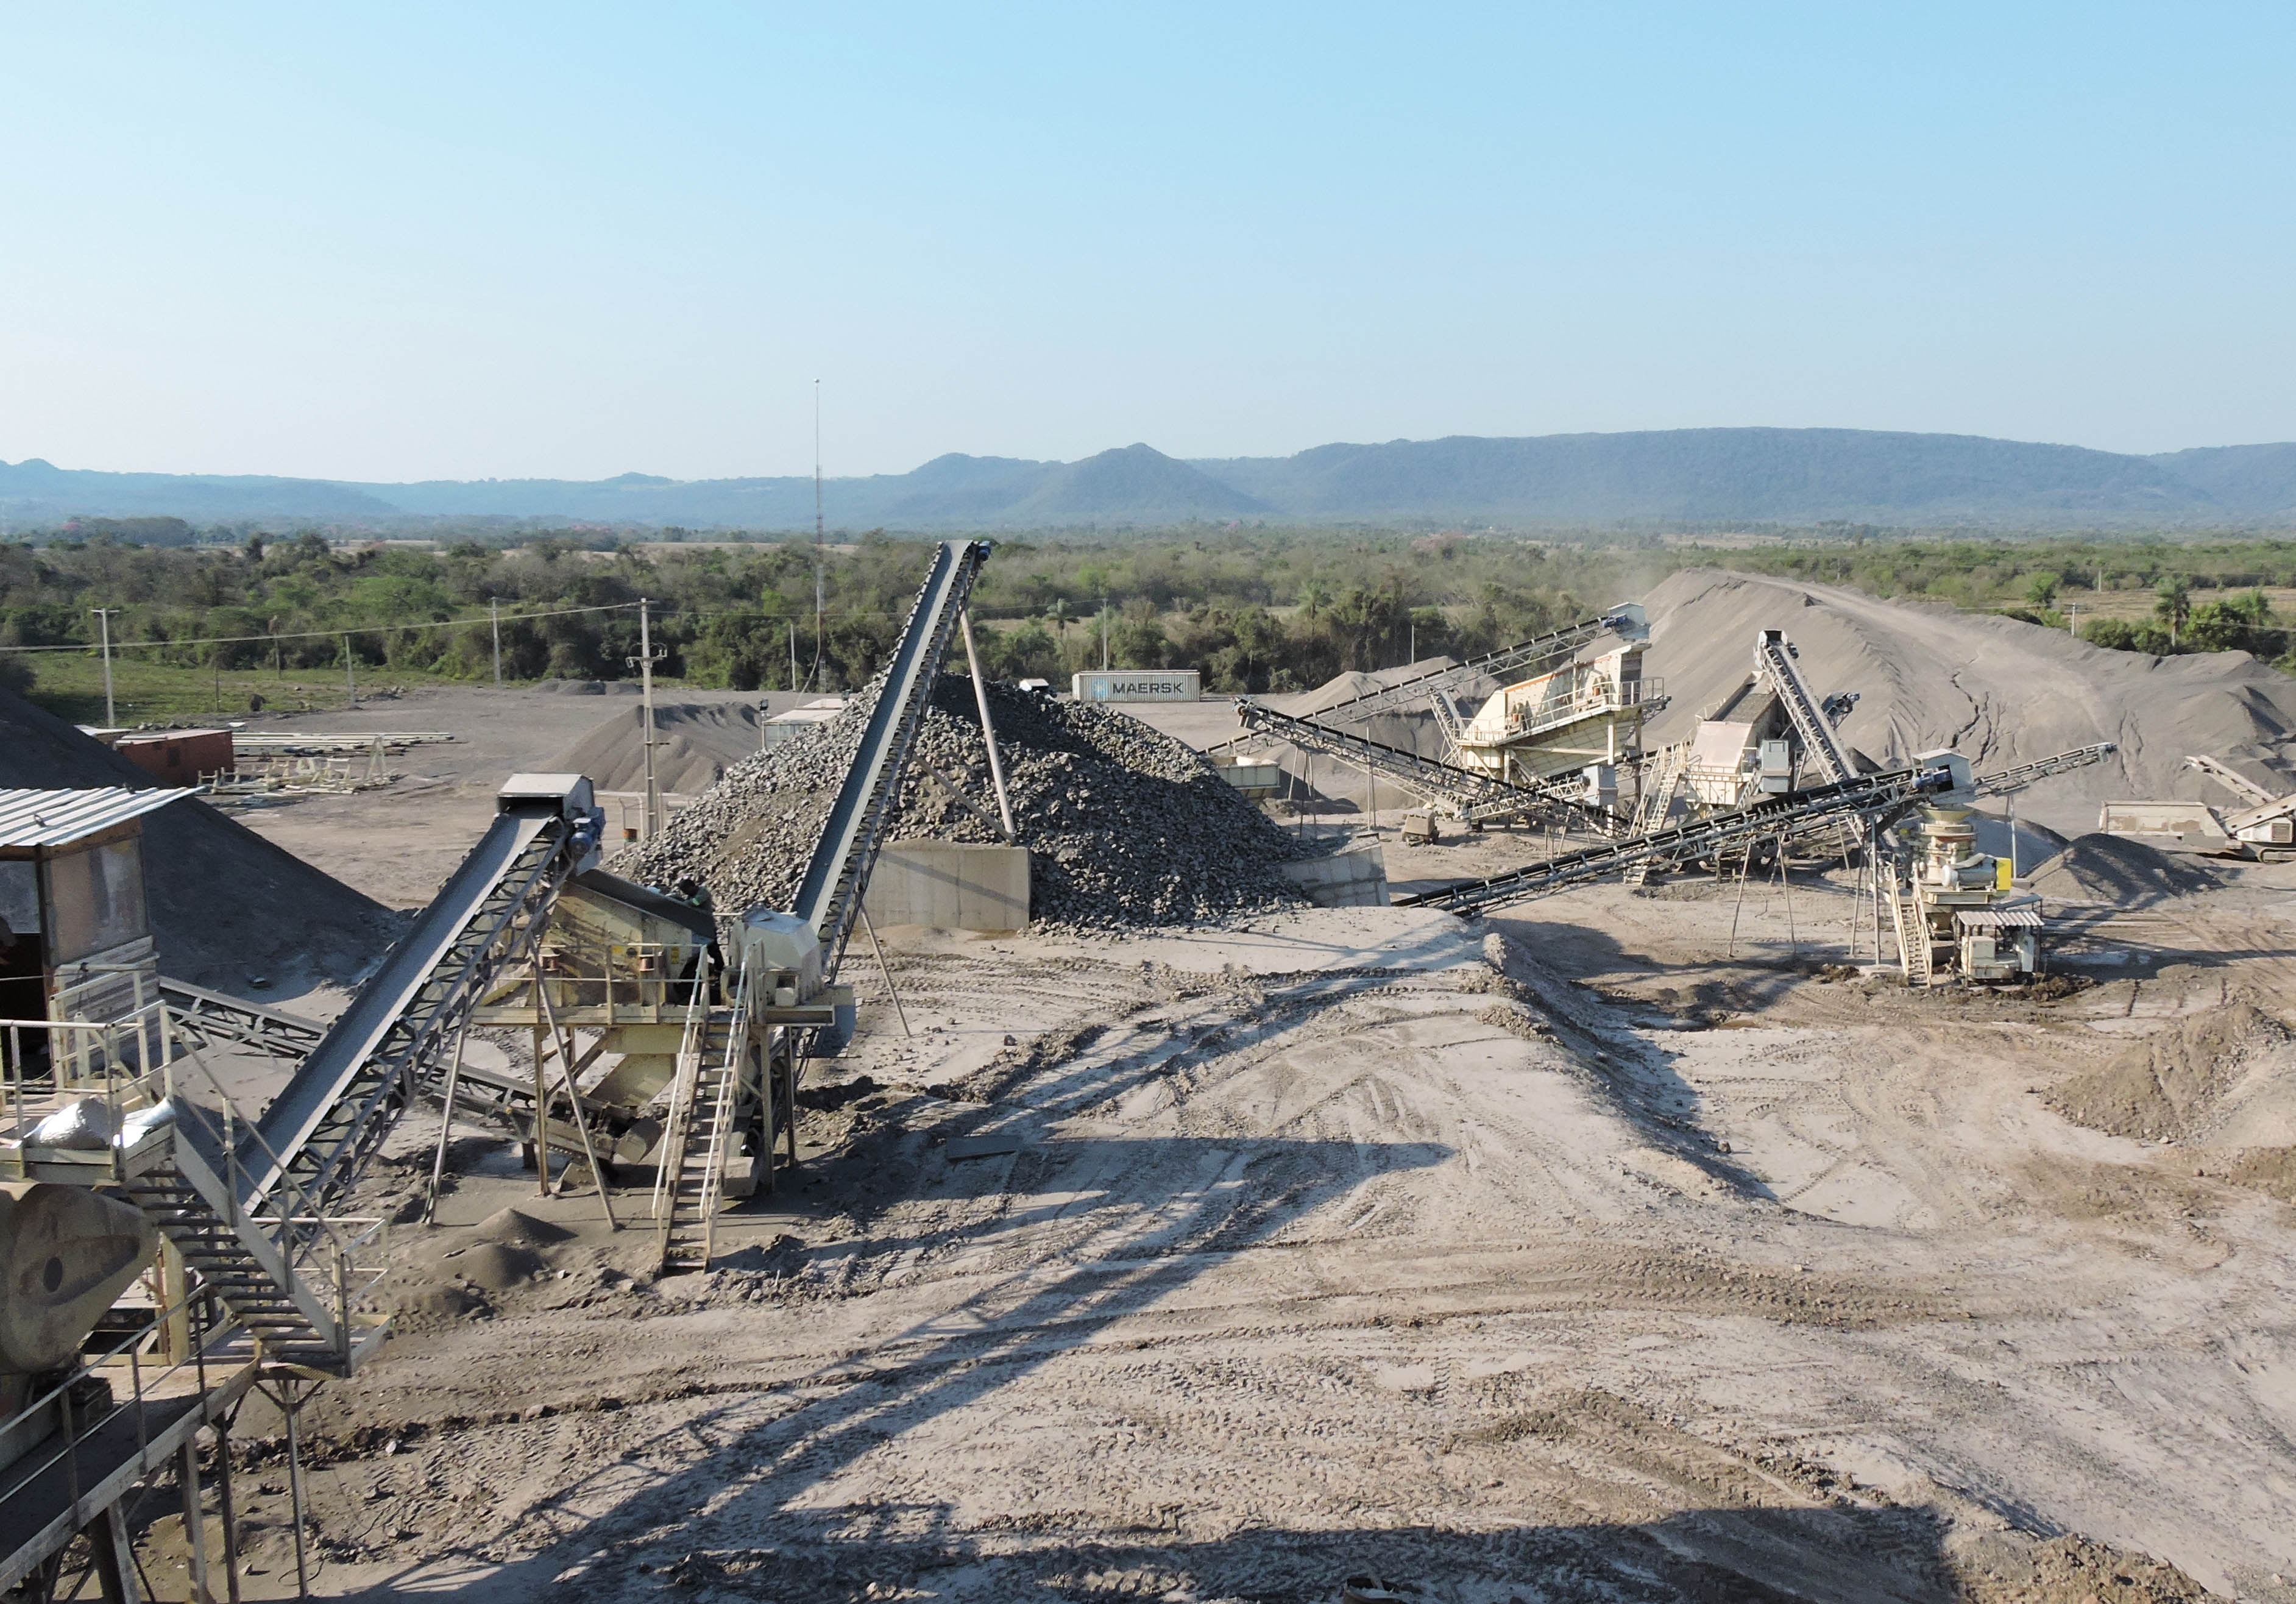 A view to the Nordplant crushing plant at Los Trigales site.